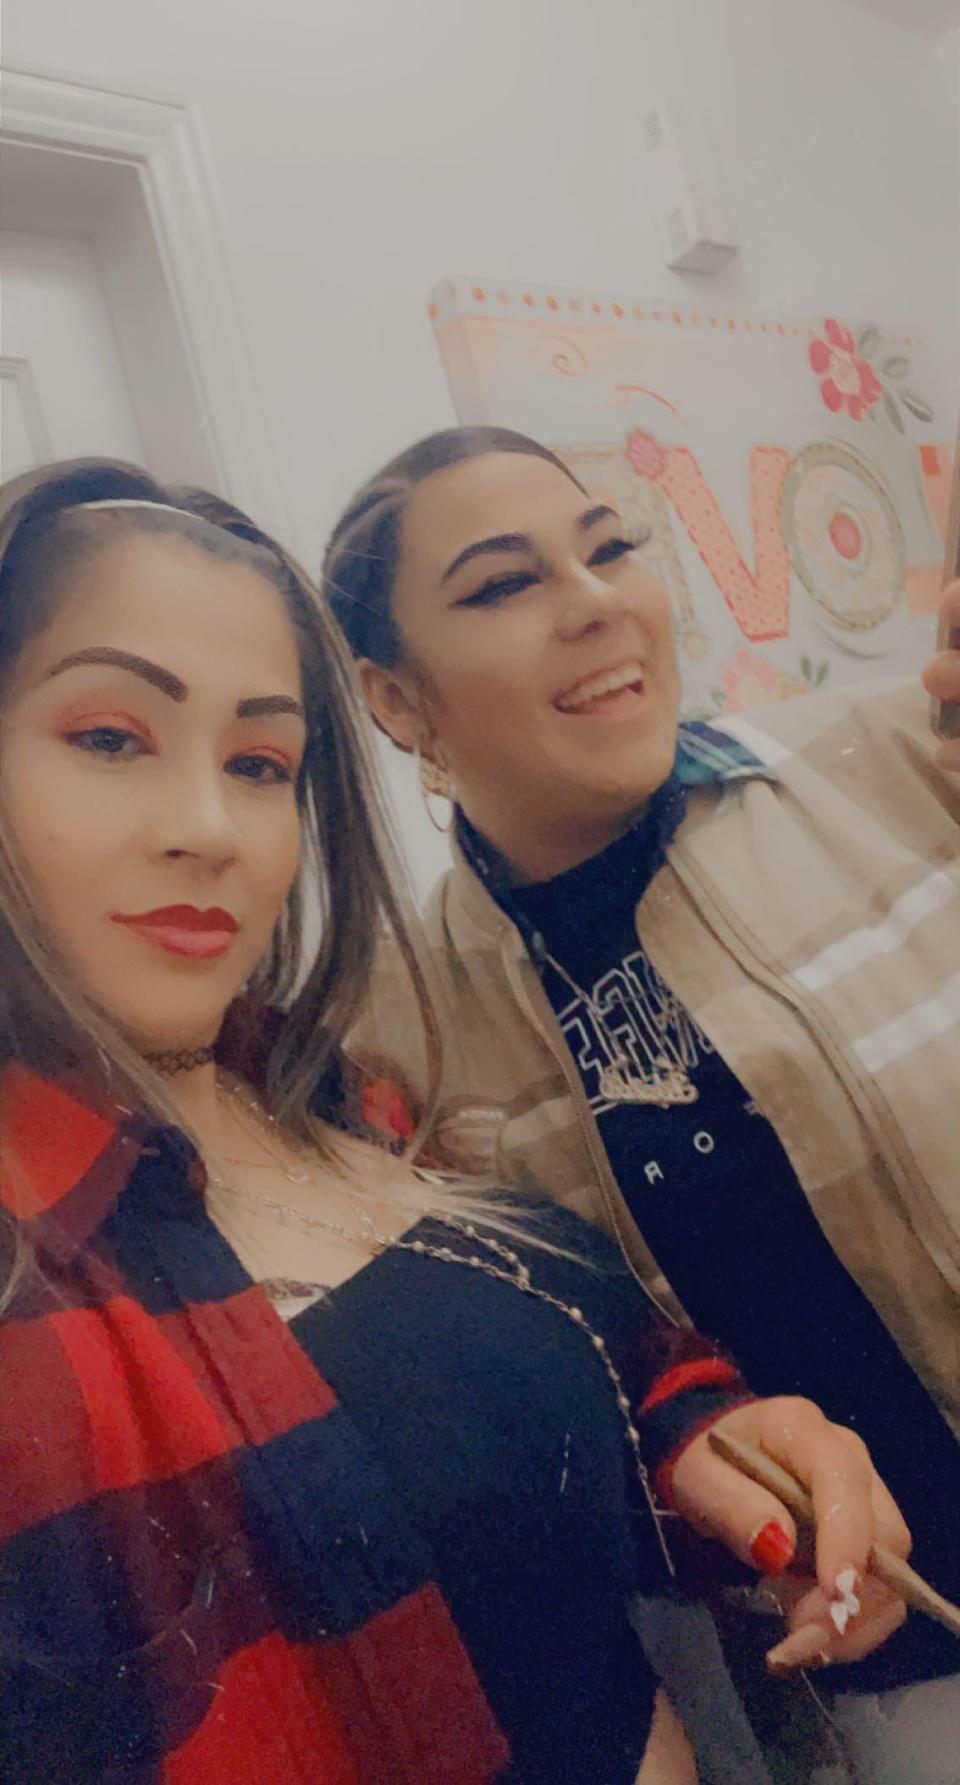 Jessica Lopez, 16, was shot in the head during what police believe was a drive-by shooting outside of East High School on March 7, 2022.

Pictured is Lopez, on the right, with her mother, Guadalupe Torres, on the left.